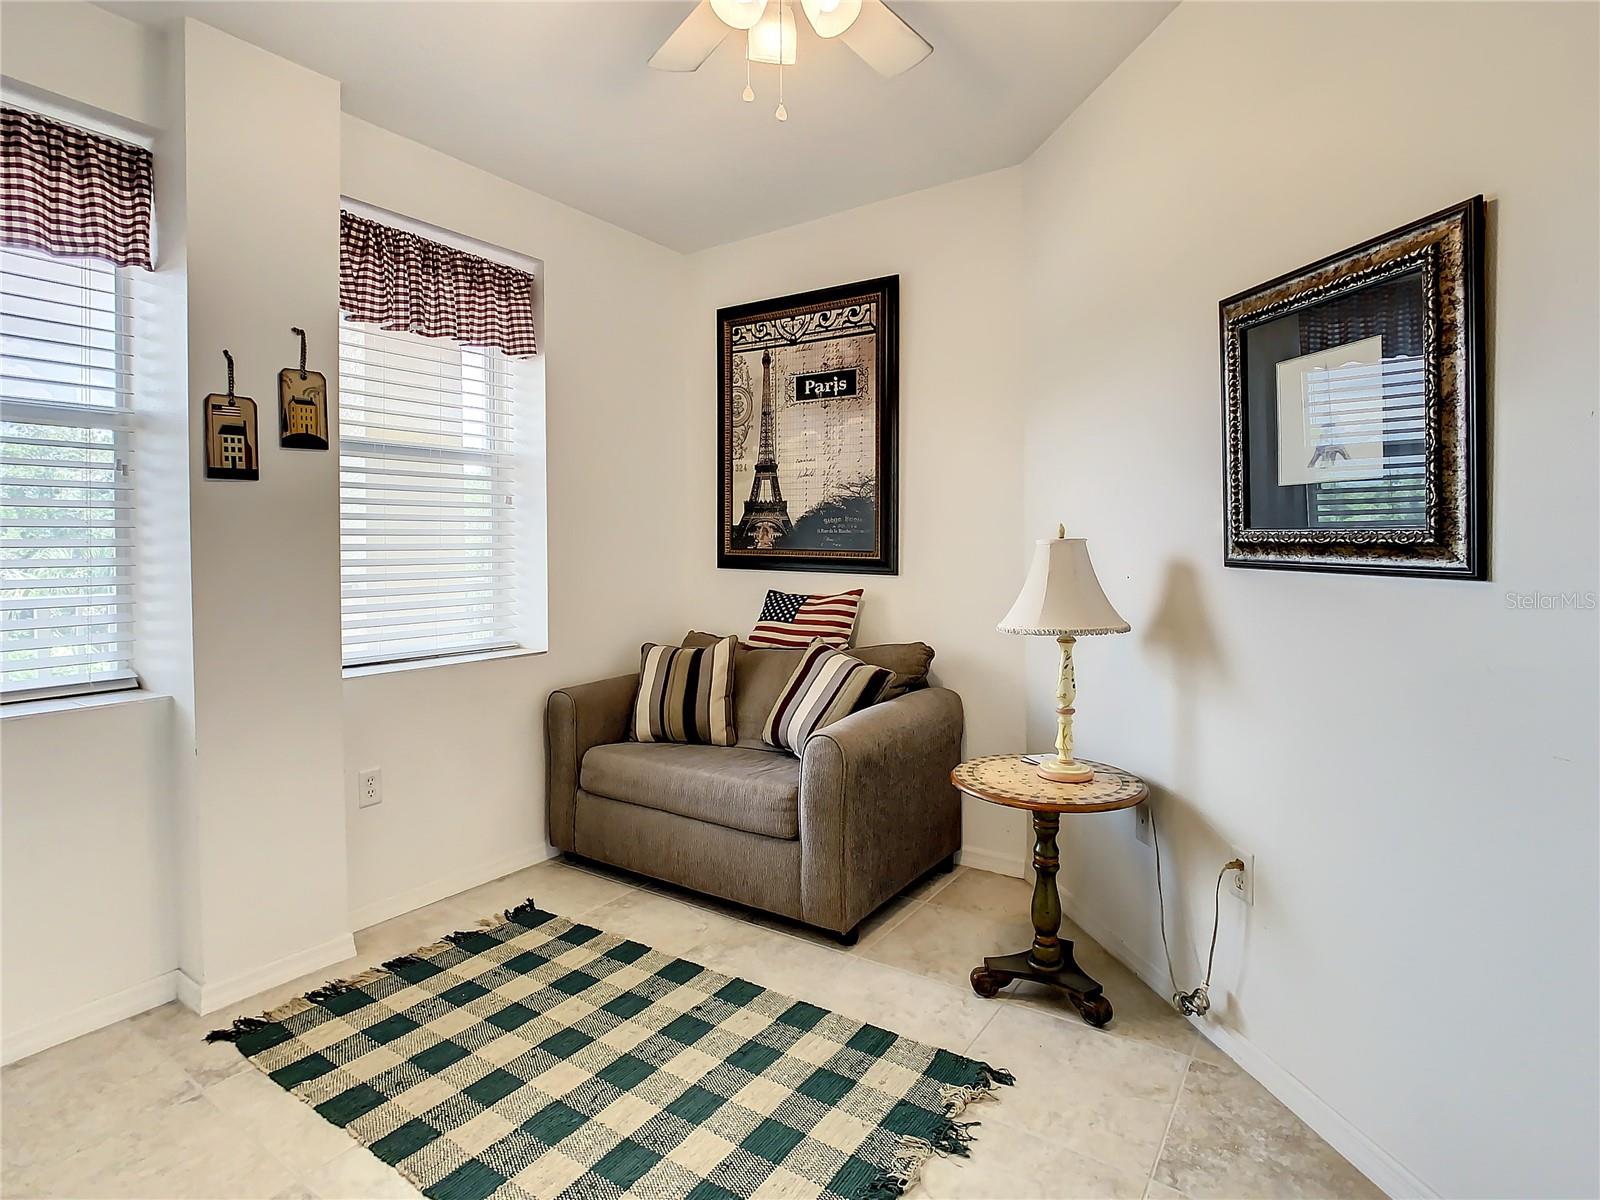 The third bedroom is located at the front of the home with stylish French doors making it perfect for an office or den